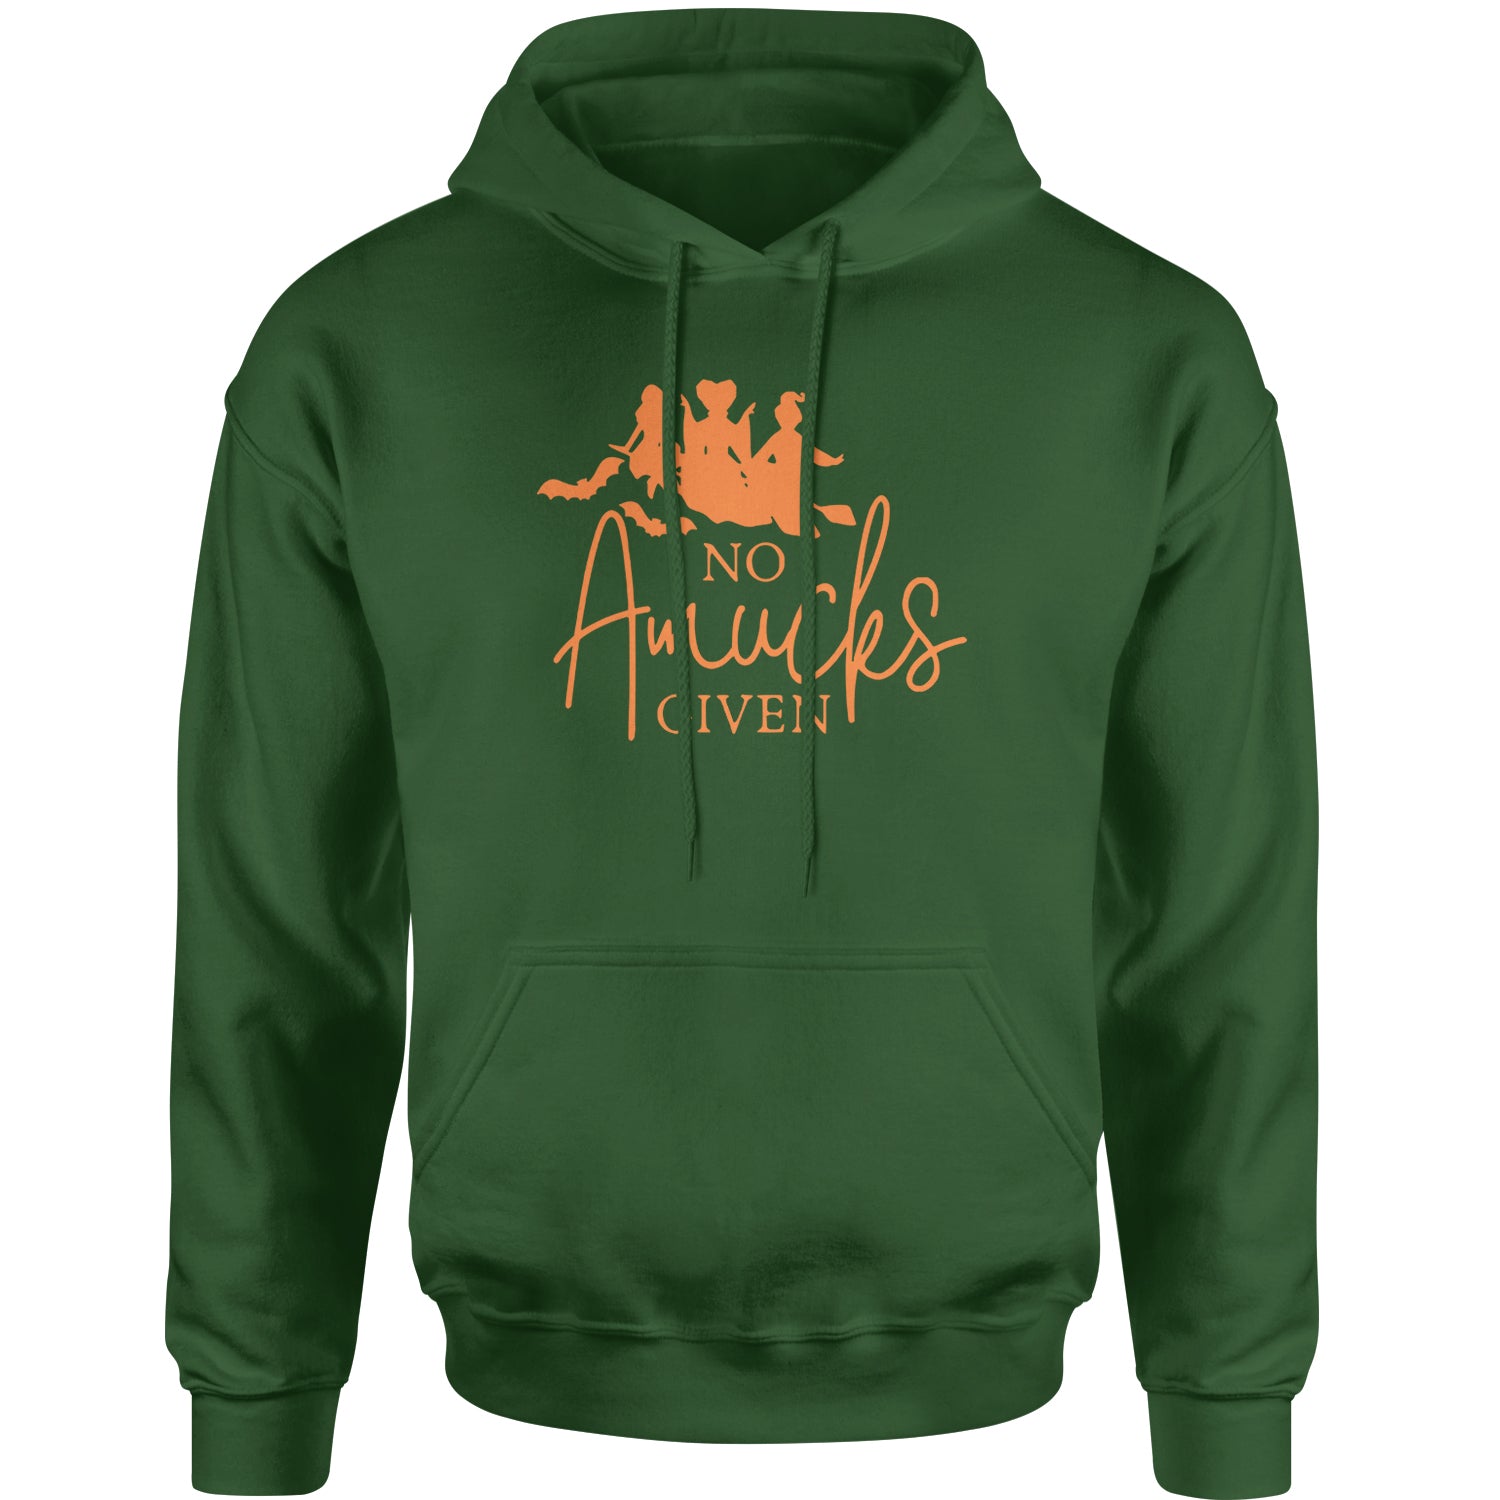 No Amucks Given Hocus Pocus Adult Hoodie Sweatshirt descendants, enchanted, eve, hallows, hocus, or, pocus, sanderson, sisters, treat, trick, witches by Expression Tees